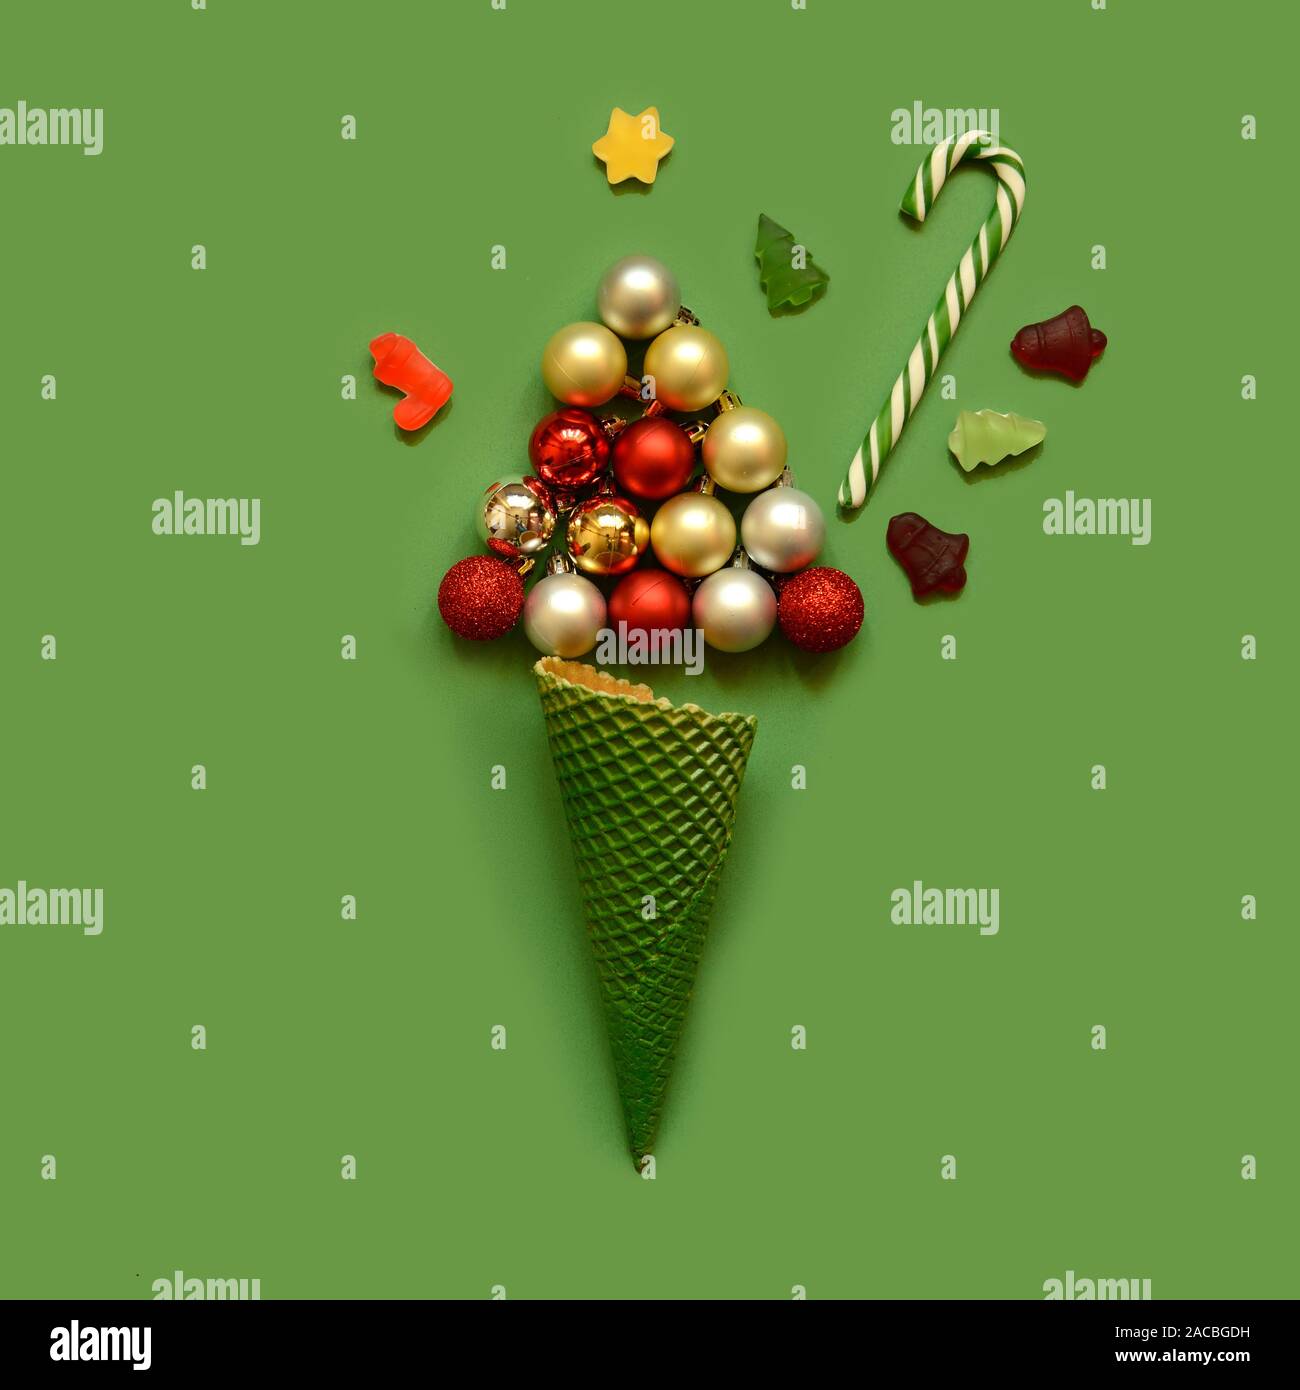 Christmas composition. Ice cream cone with tree from balls,candy canes and sweets on green background. Christmas, winter, new year concept. Flat lay, Stock Photo